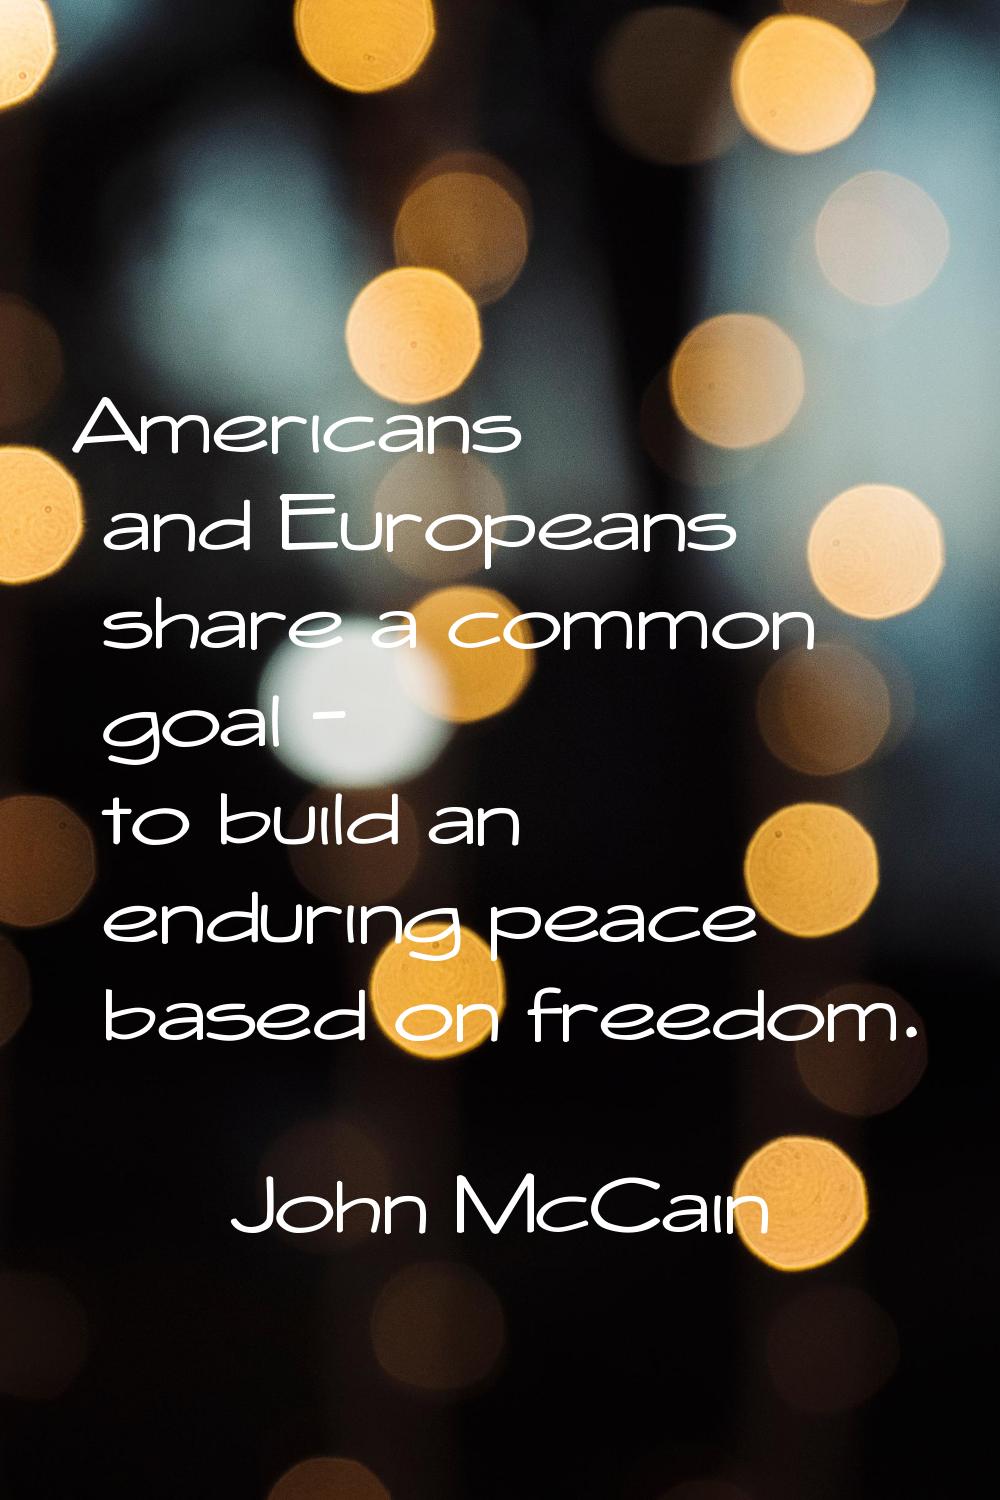 Americans and Europeans share a common goal - to build an enduring peace based on freedom.